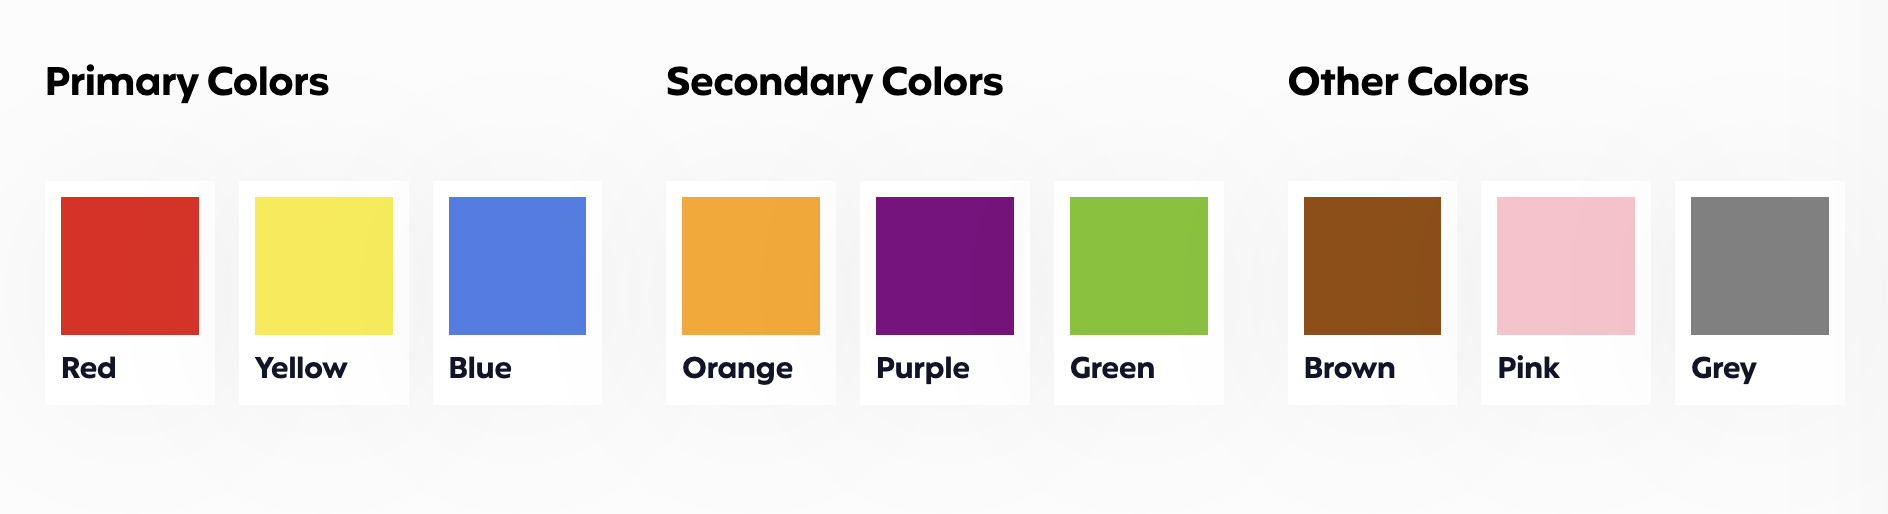 Primary and secondary colors.png